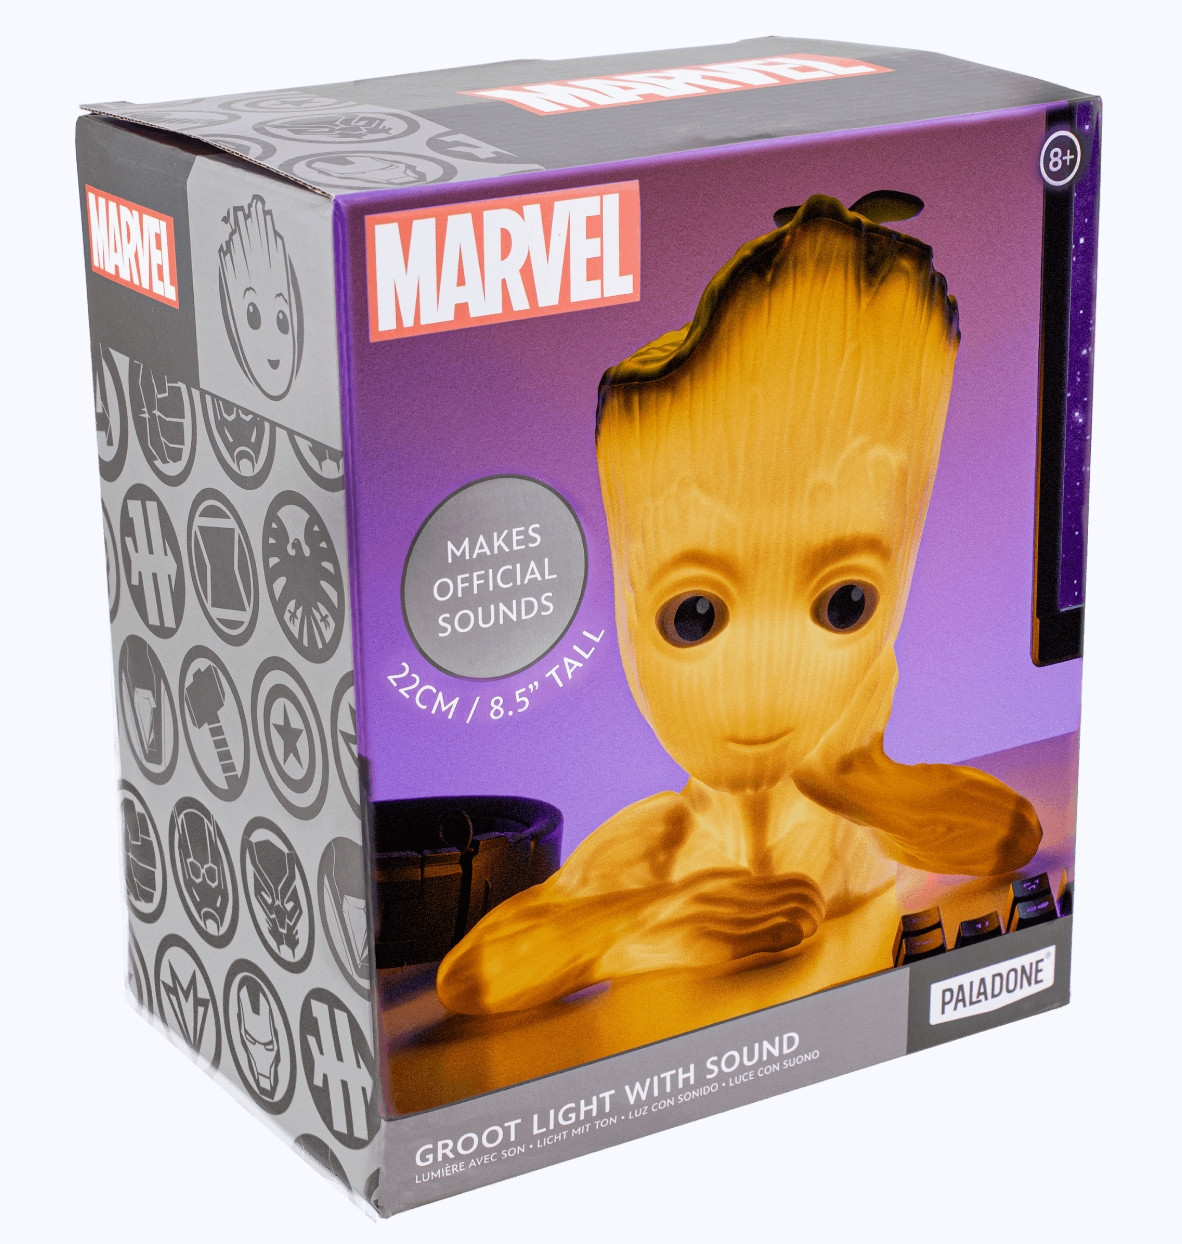 Marvel Guardians of the Galaxy - Groot Light with Sound